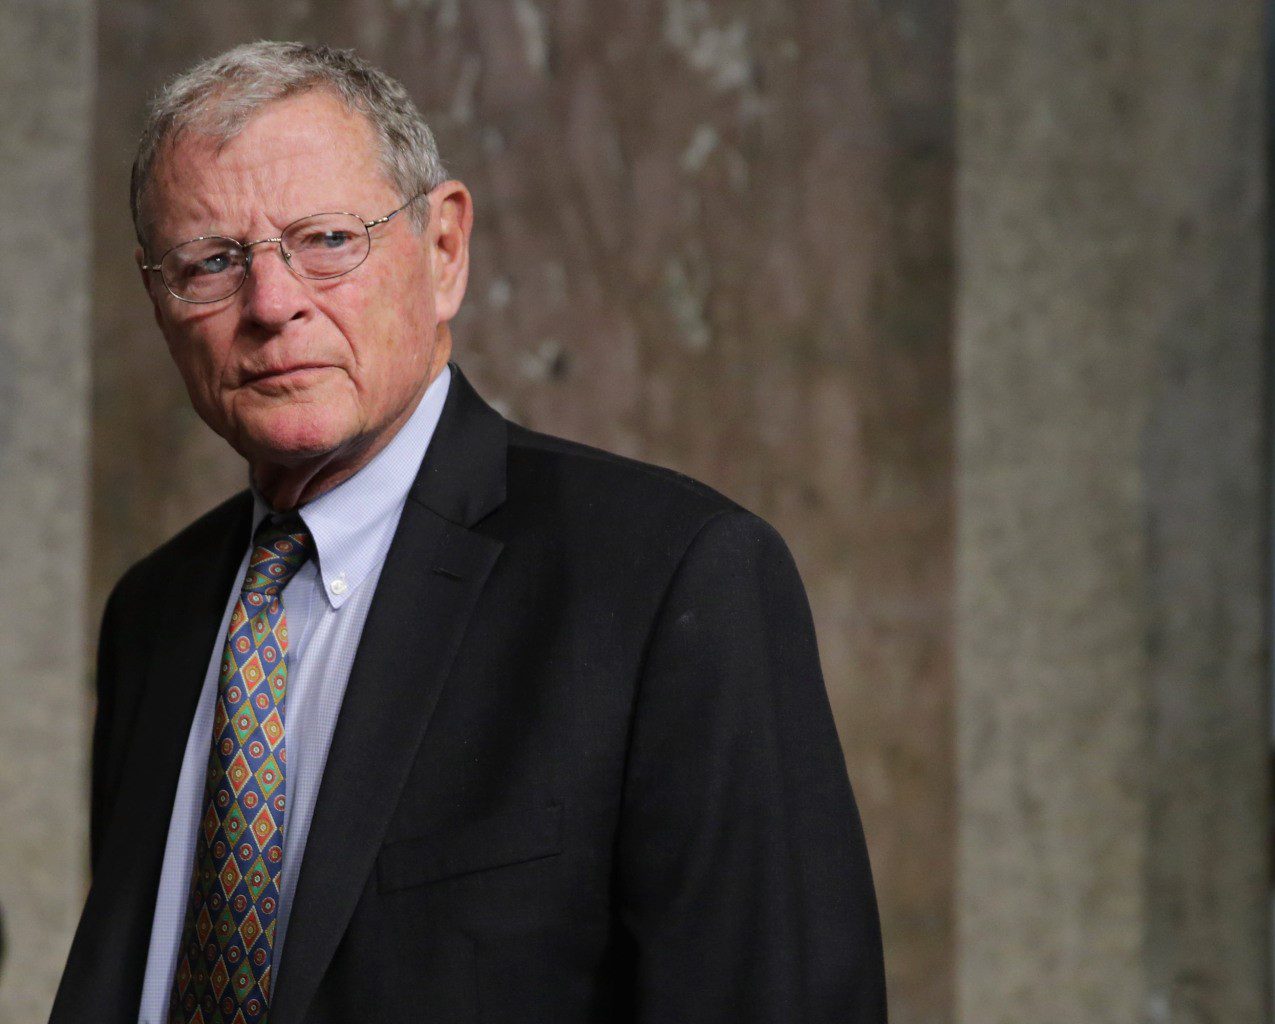 Senator James Inhofe Officially Named Chairman of Senate Armed Services Committee